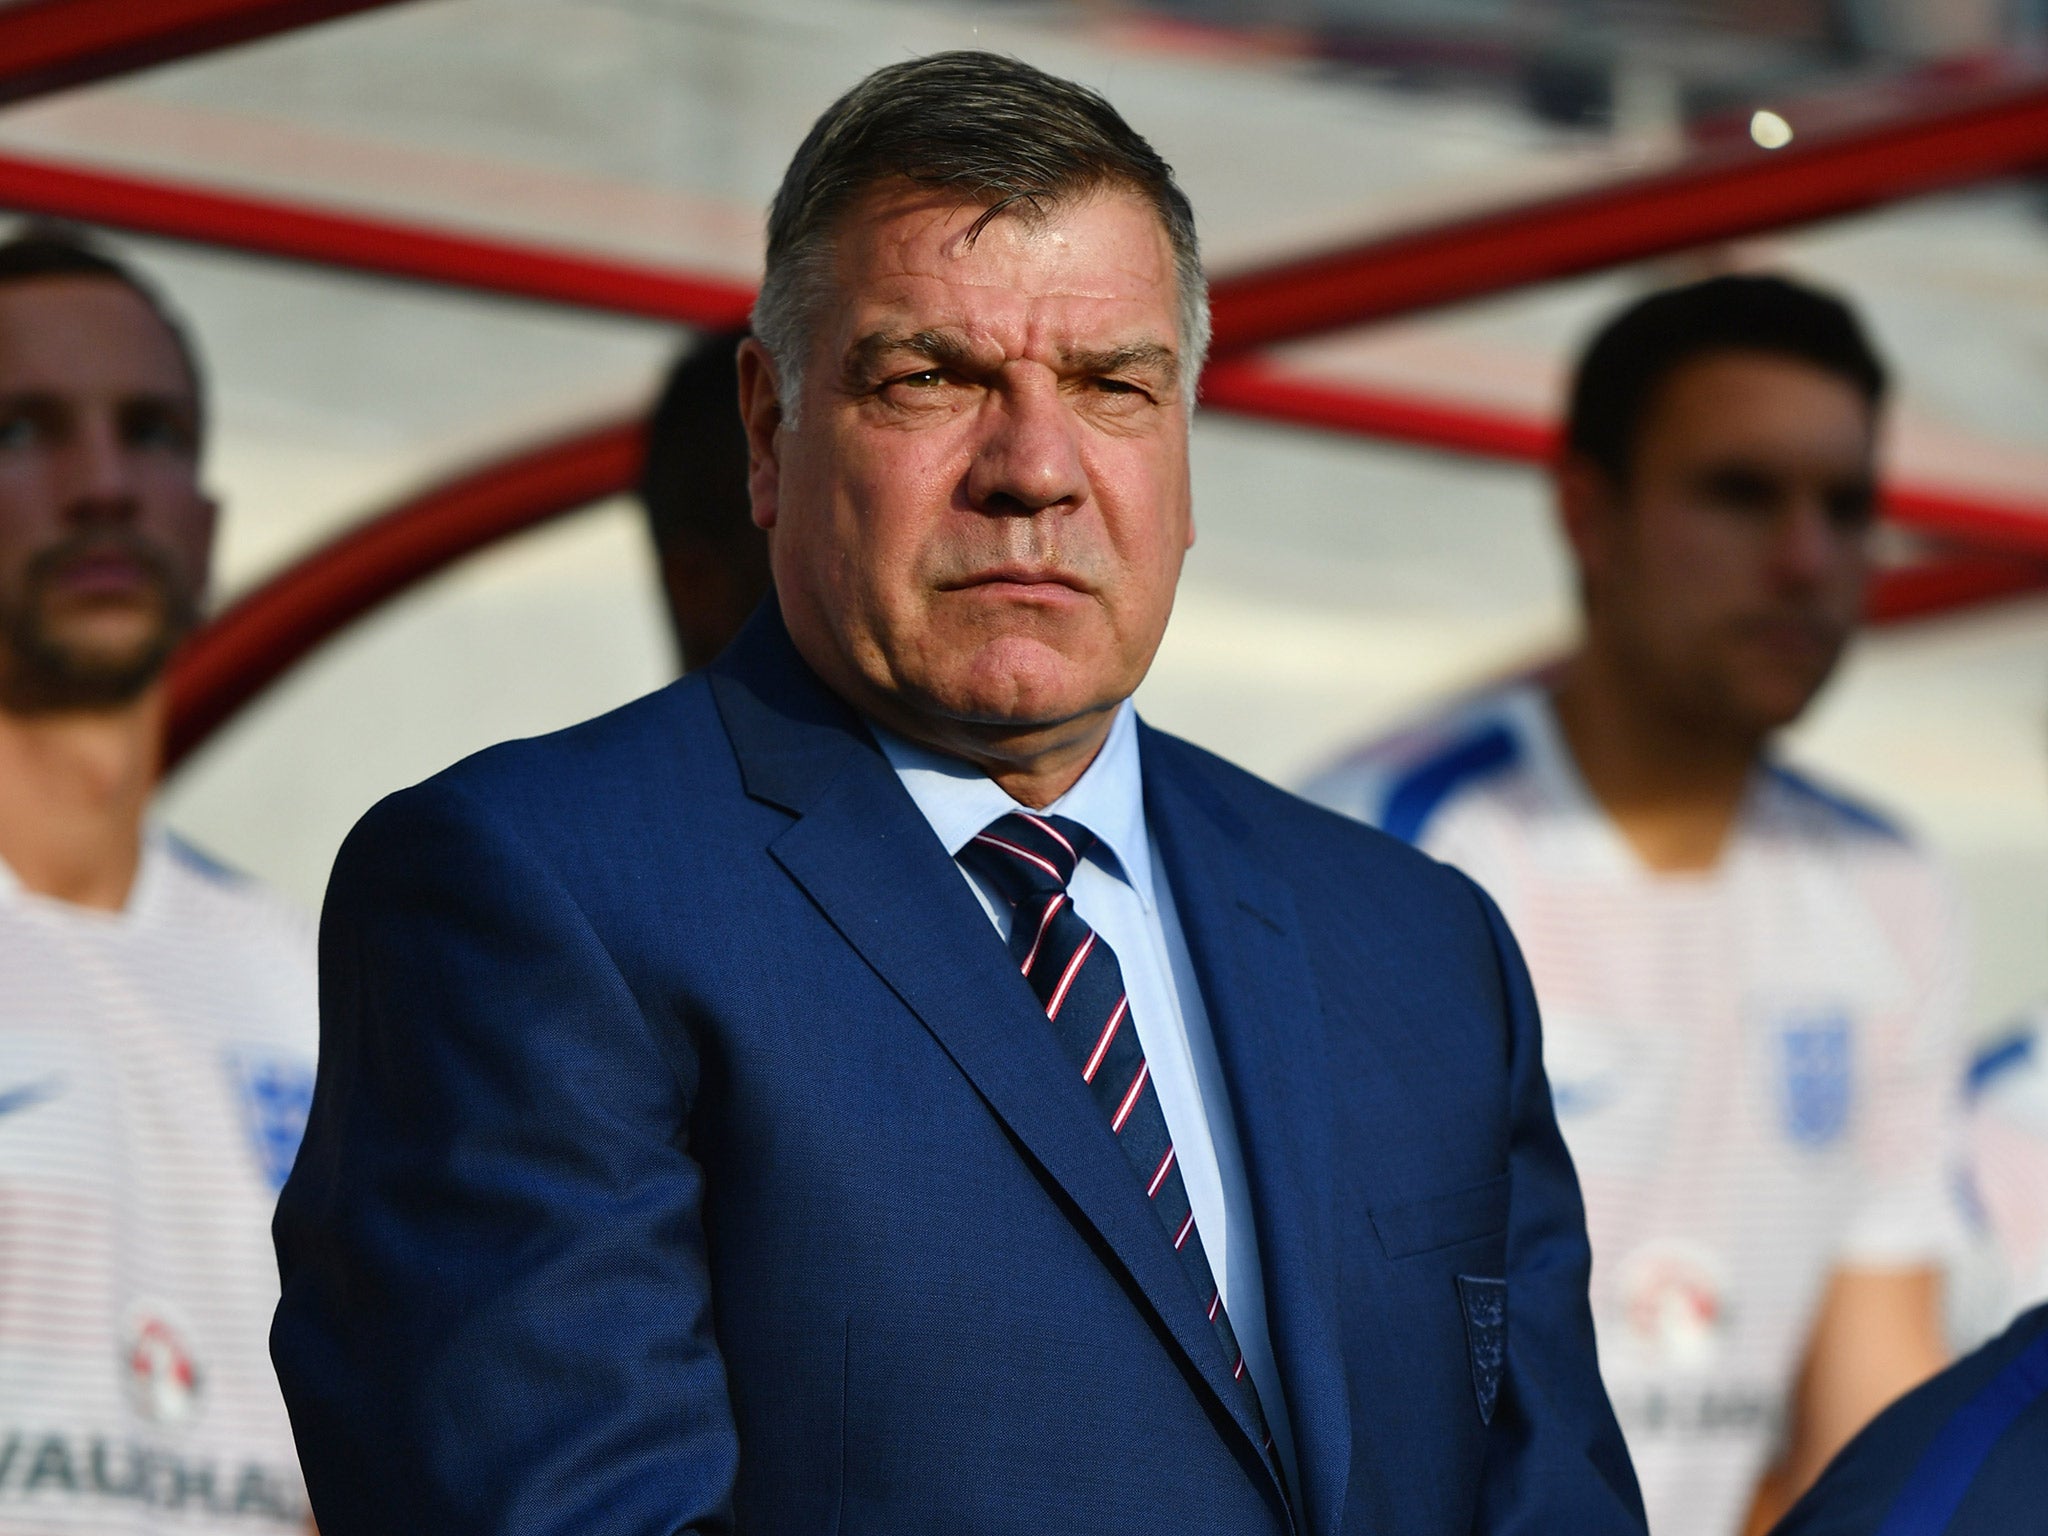 Sam Allardyce has plenty to consider after his first match in charge of England